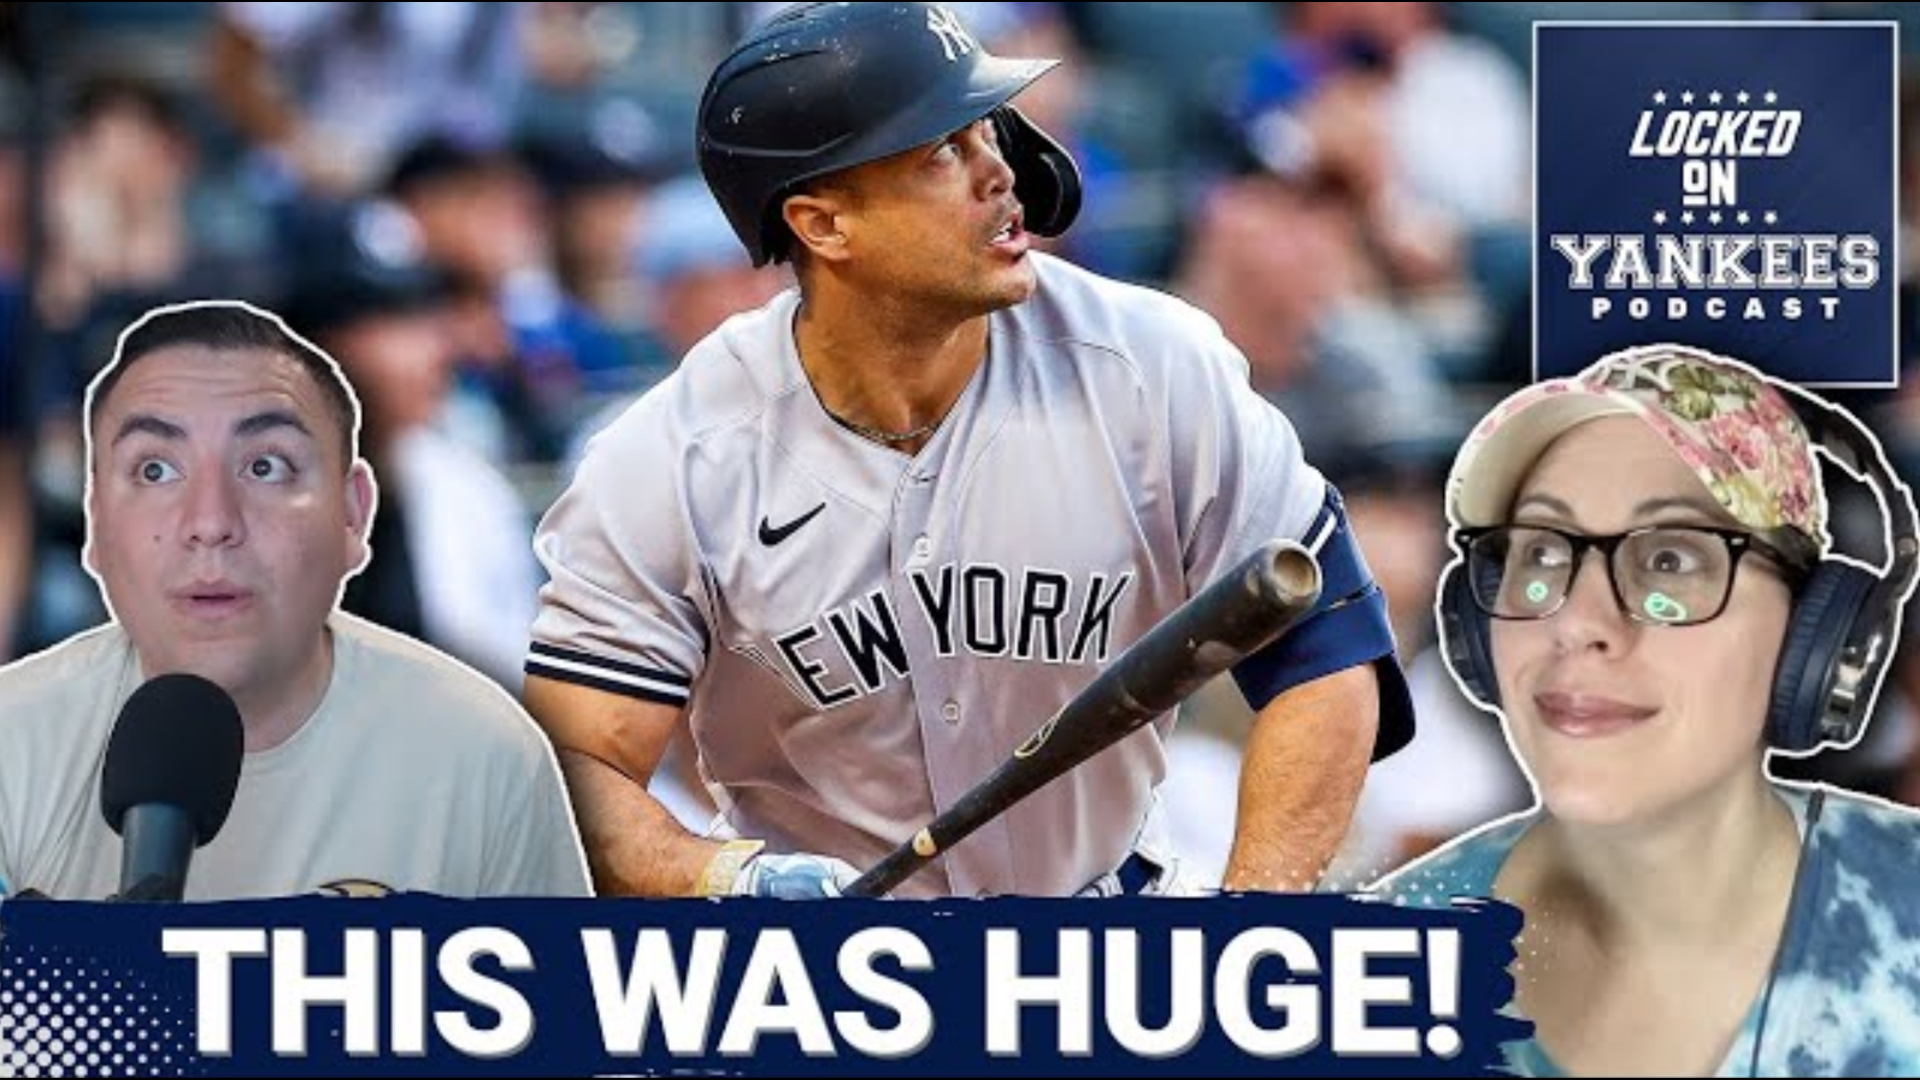 Yankees showed GUTS in this WILD WIN over Mets, NY Yankees Podcast